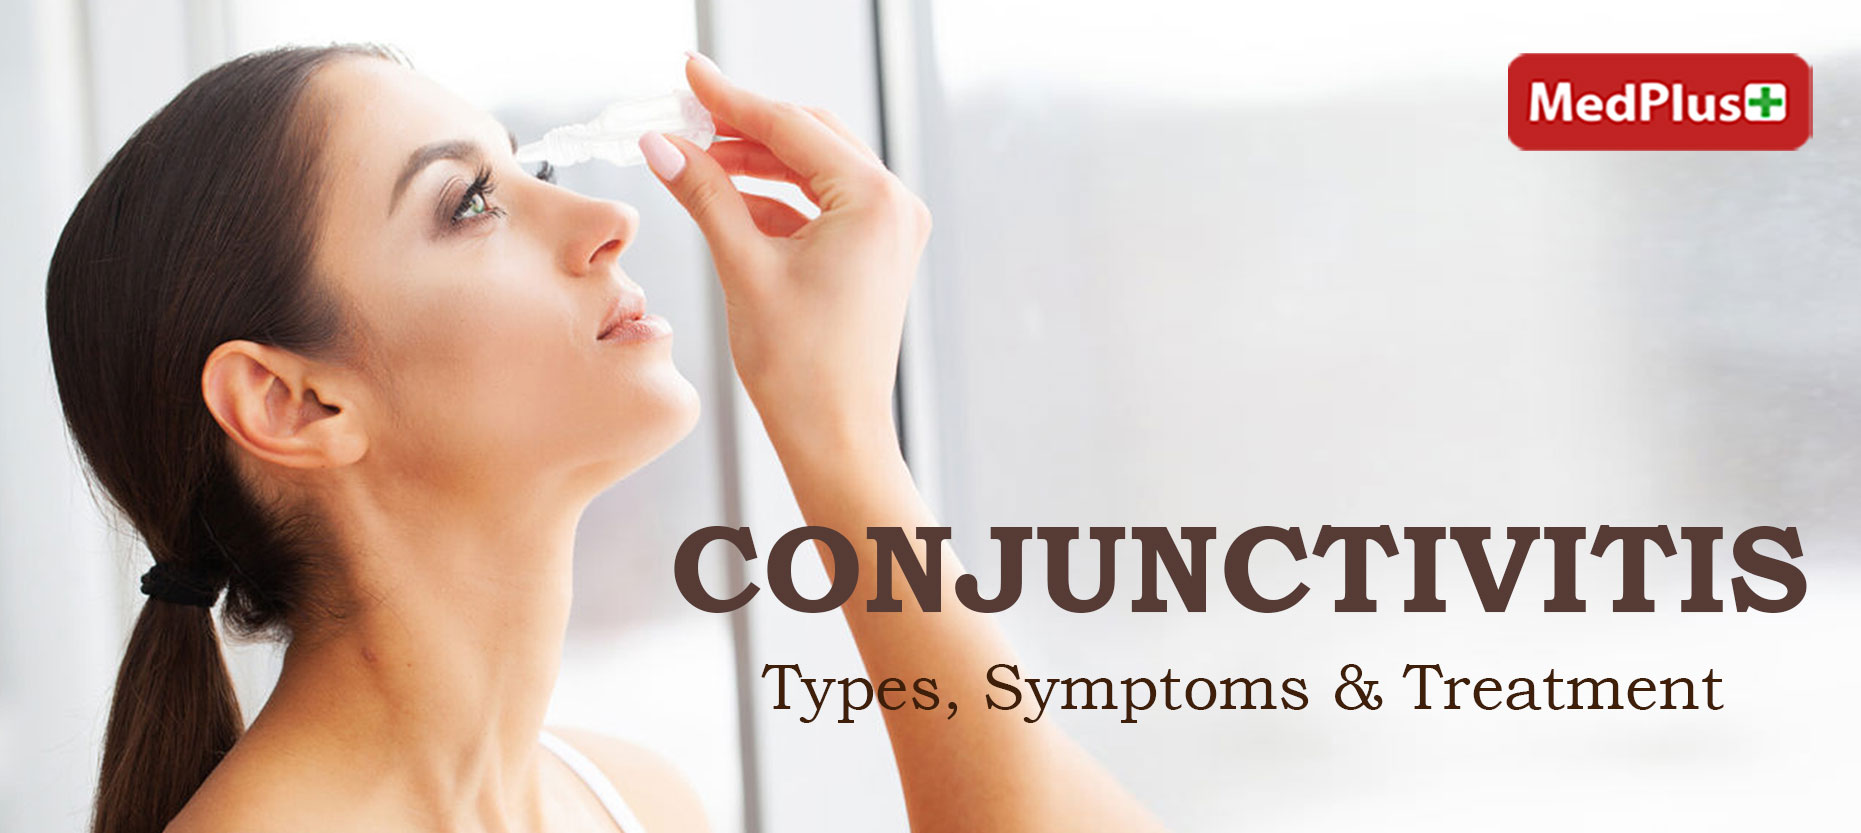 Conjunctivitis: Types, Symptoms, and Treatment